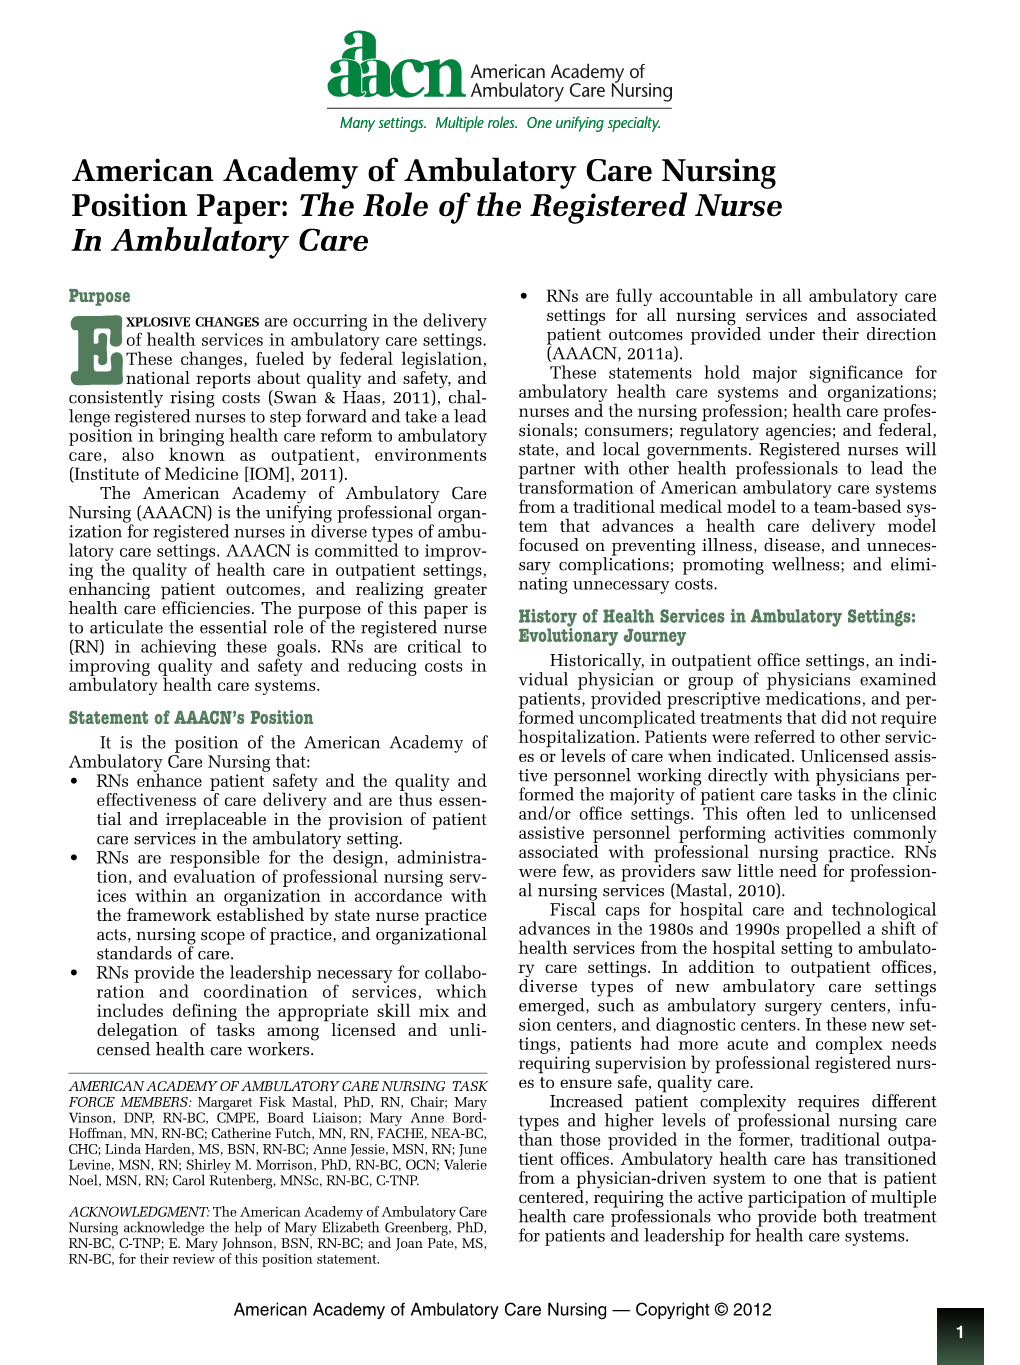 American Academy of Ambulatory Care Nursing Position Paper: the Role of the Registered Nurse in Ambulatory Care